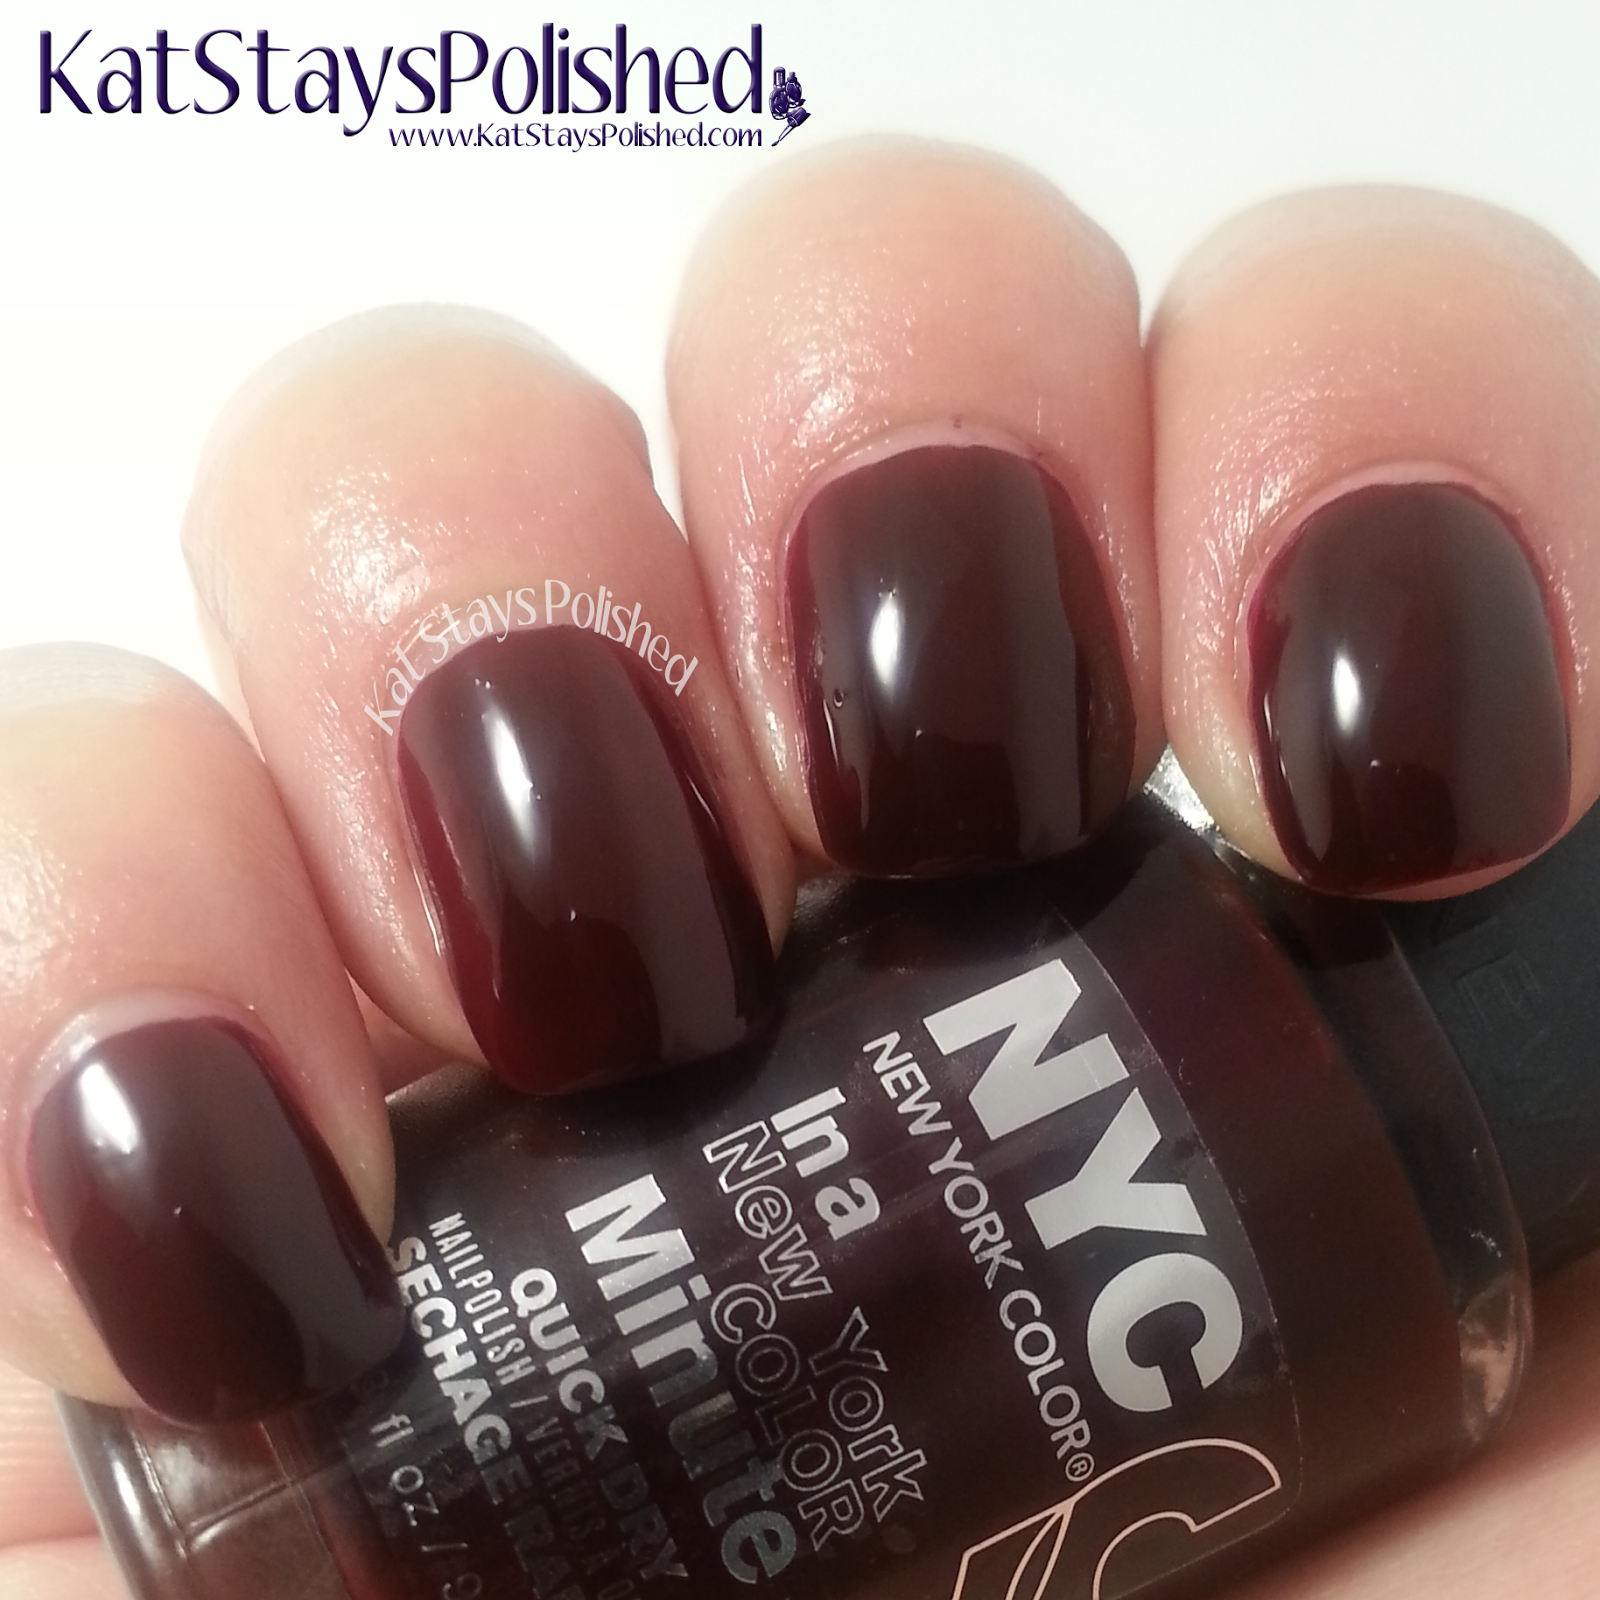 NYC New York Color - Midnight Beauty Collection - I Am Not AffRED | Kat Stays Polished